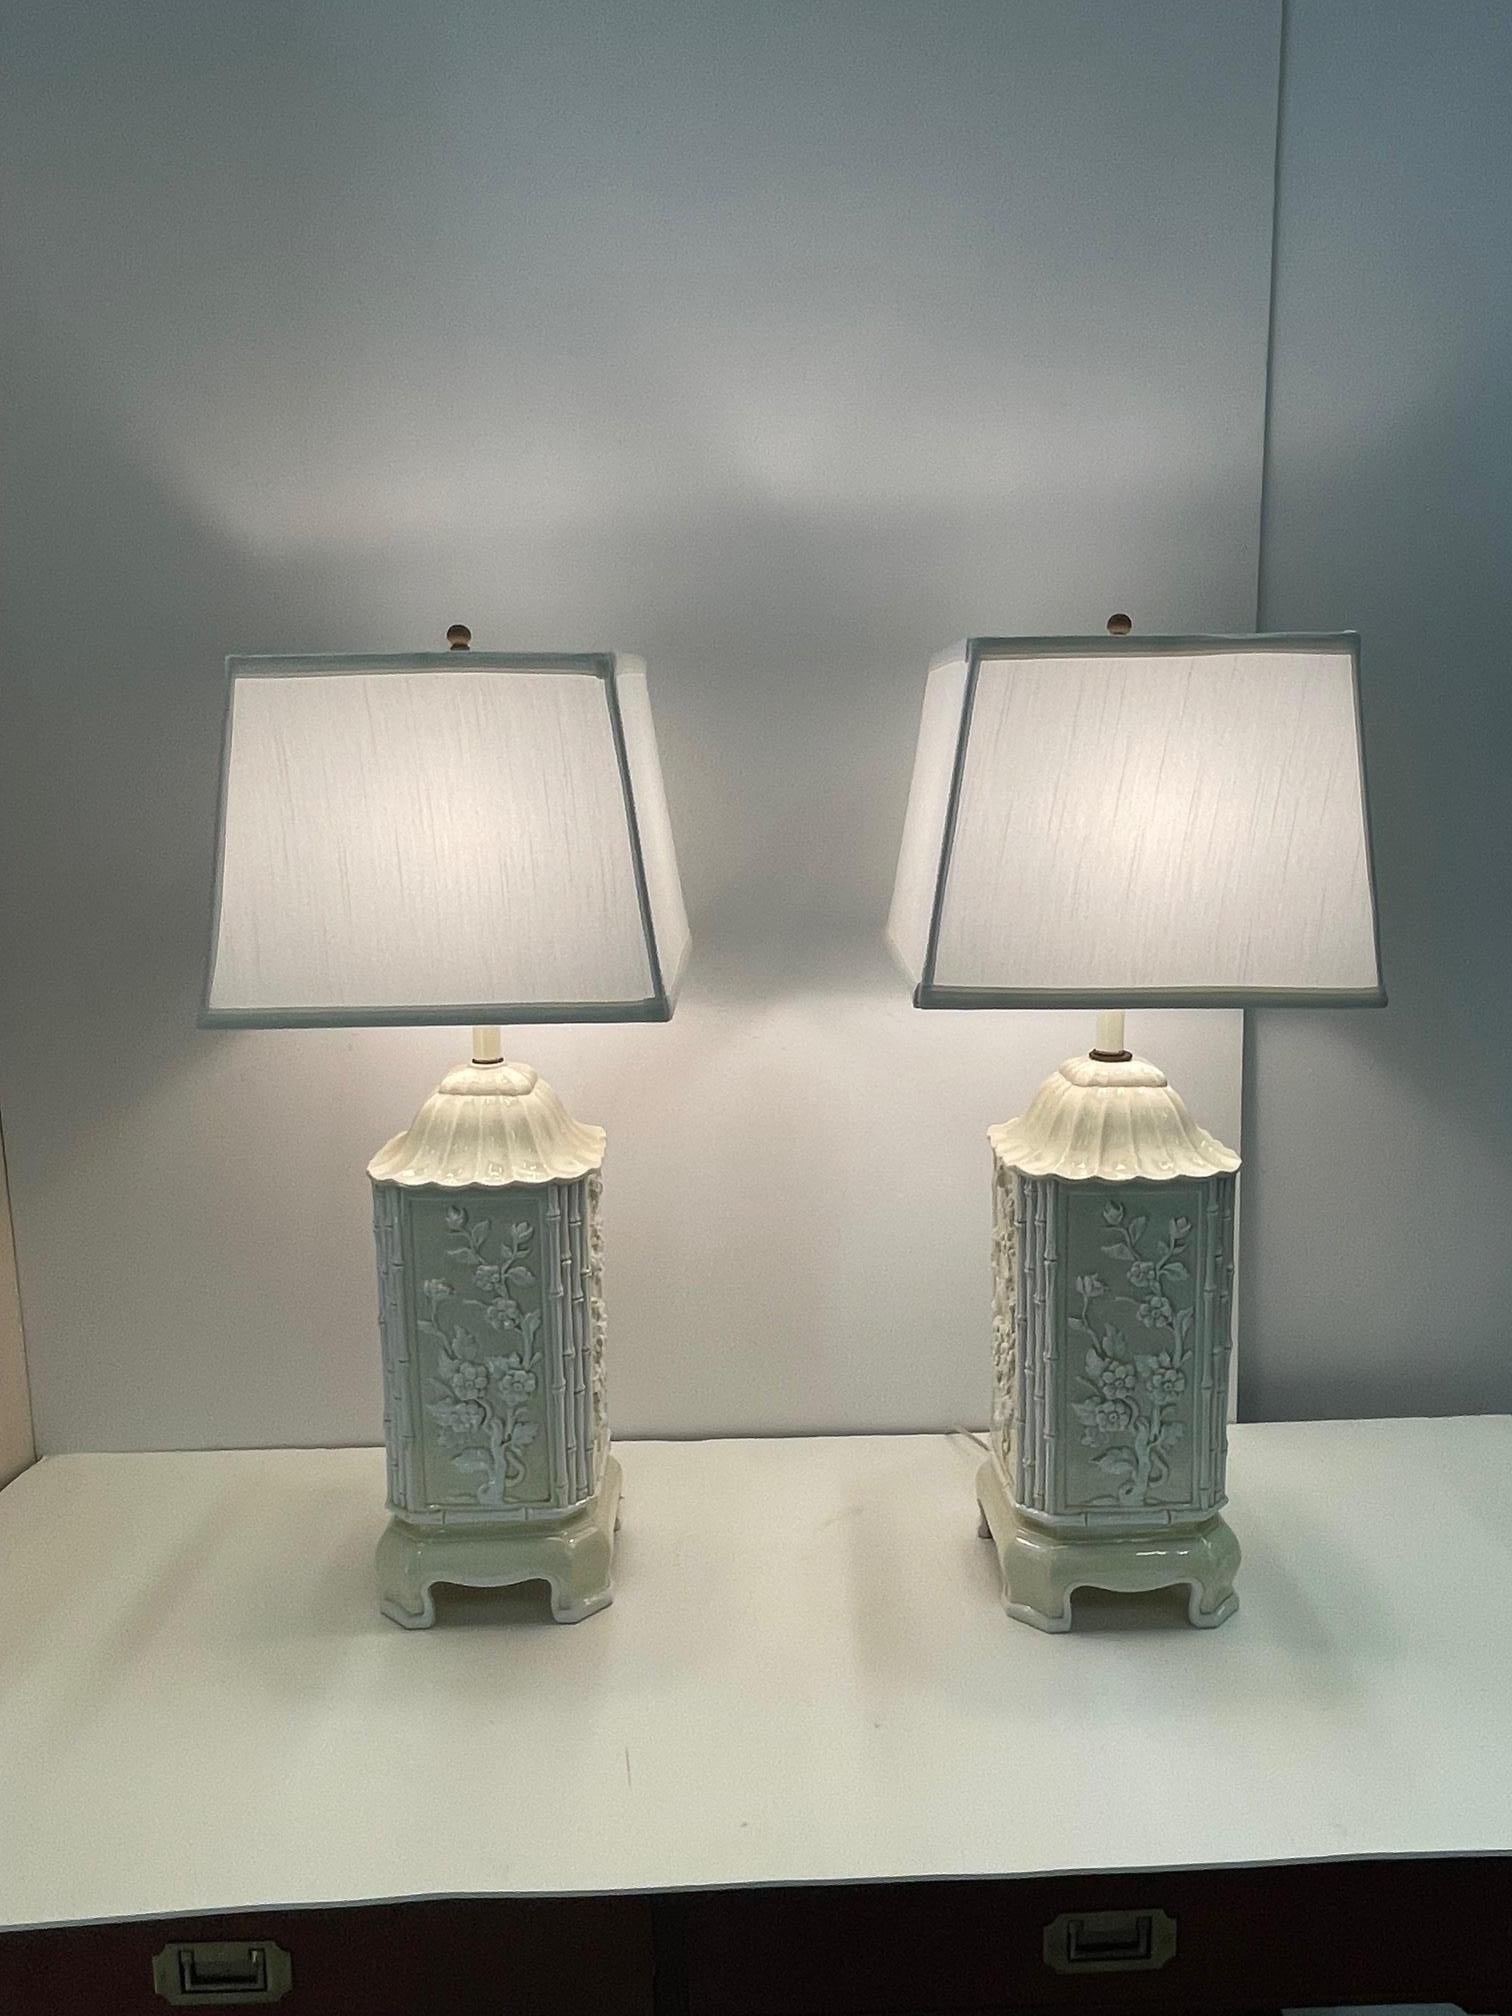 Lovely pair of Italian ceramic table lamps having khaki very light yellow beige background and white raised bamboo and floral decoration. The lamps have an Asian flair with pagoda design and raised stands.